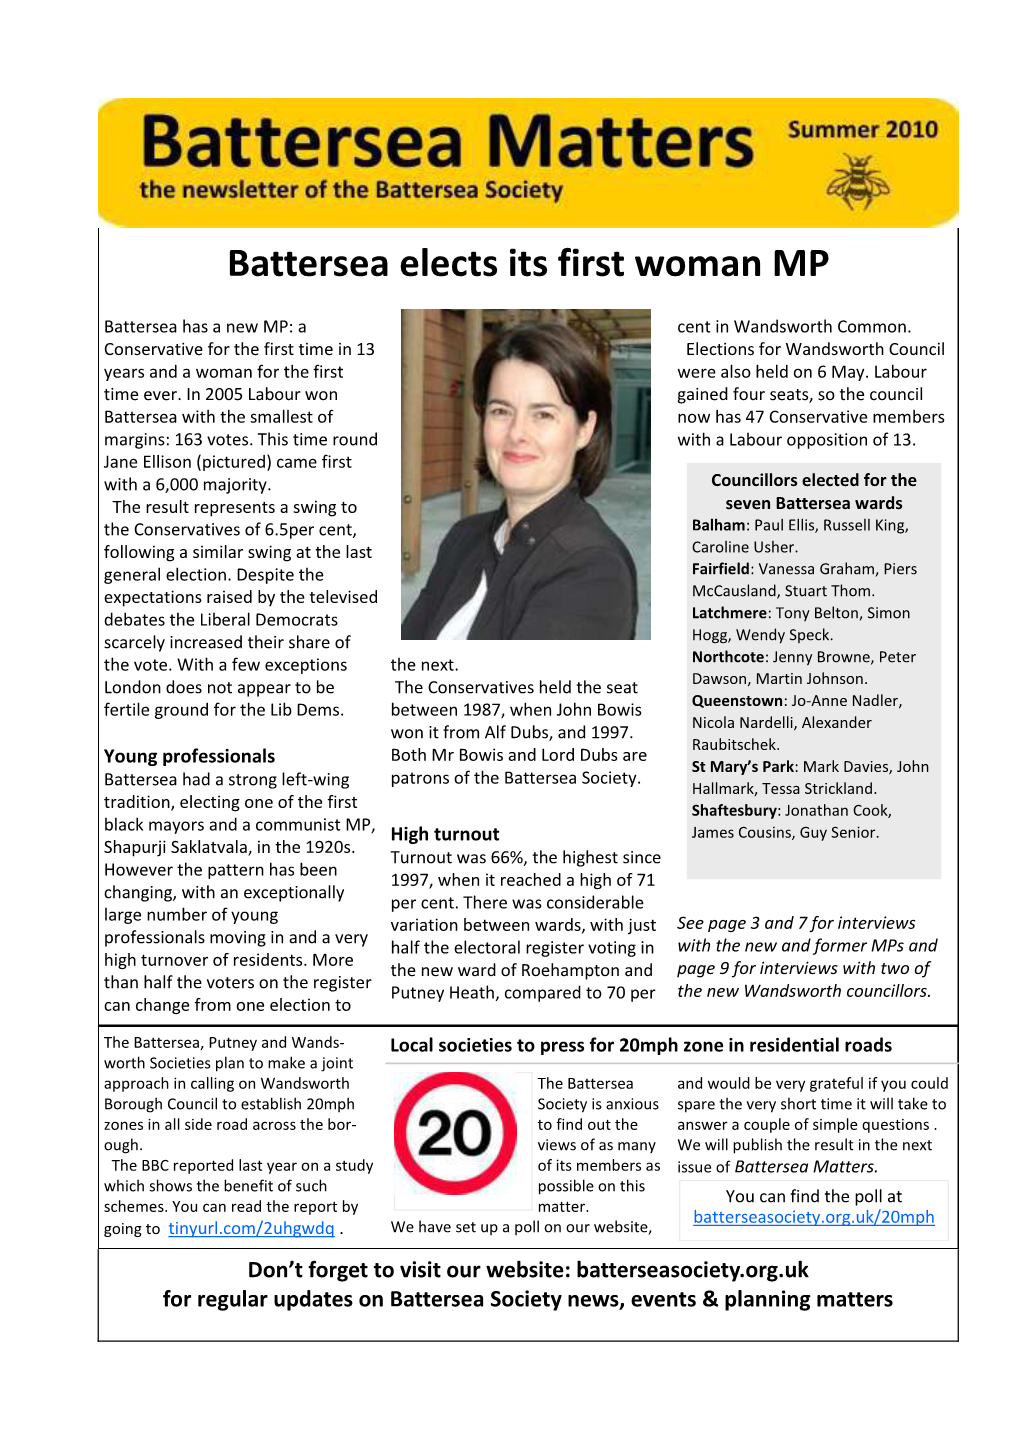 Battersea Elects Its First Woman MP